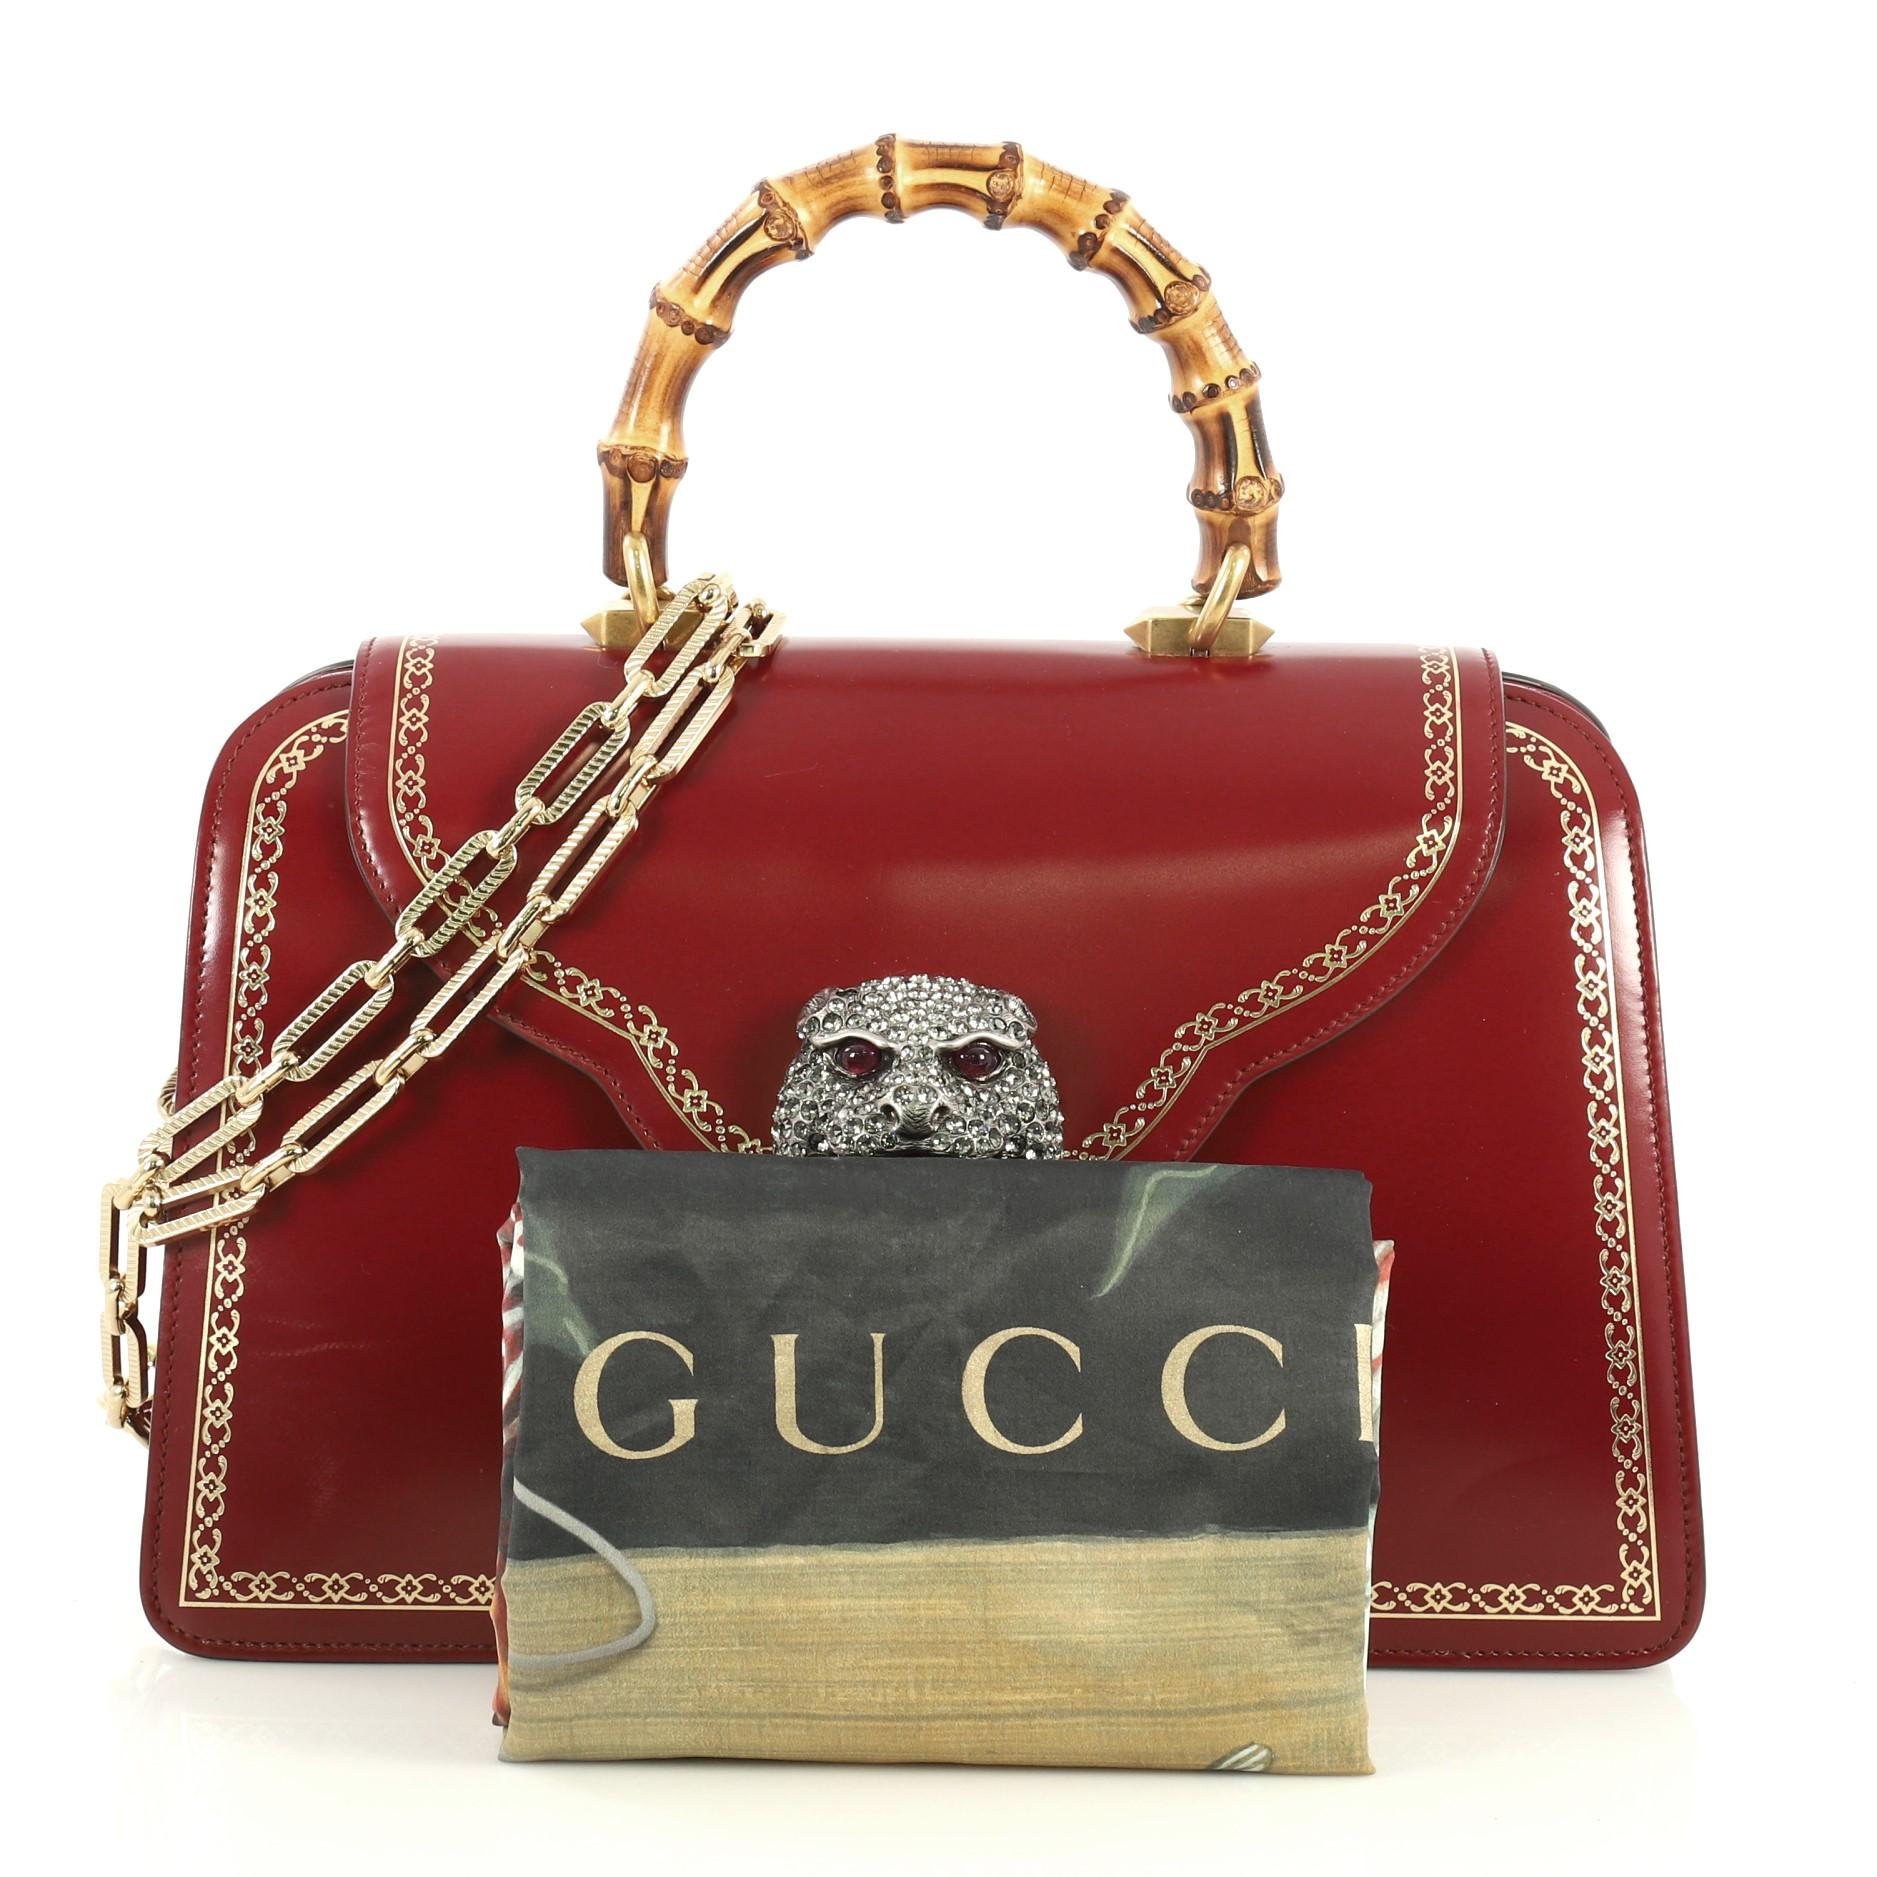 This Gucci Thiara Top Handle Bag Frame Print Leather Medium, crafted from red leather, features bamboo top handle, crystal-embellished tiger head on its flap, and aged gold-tone hardware. Its magnetic snap closure opens to a printed satin interior